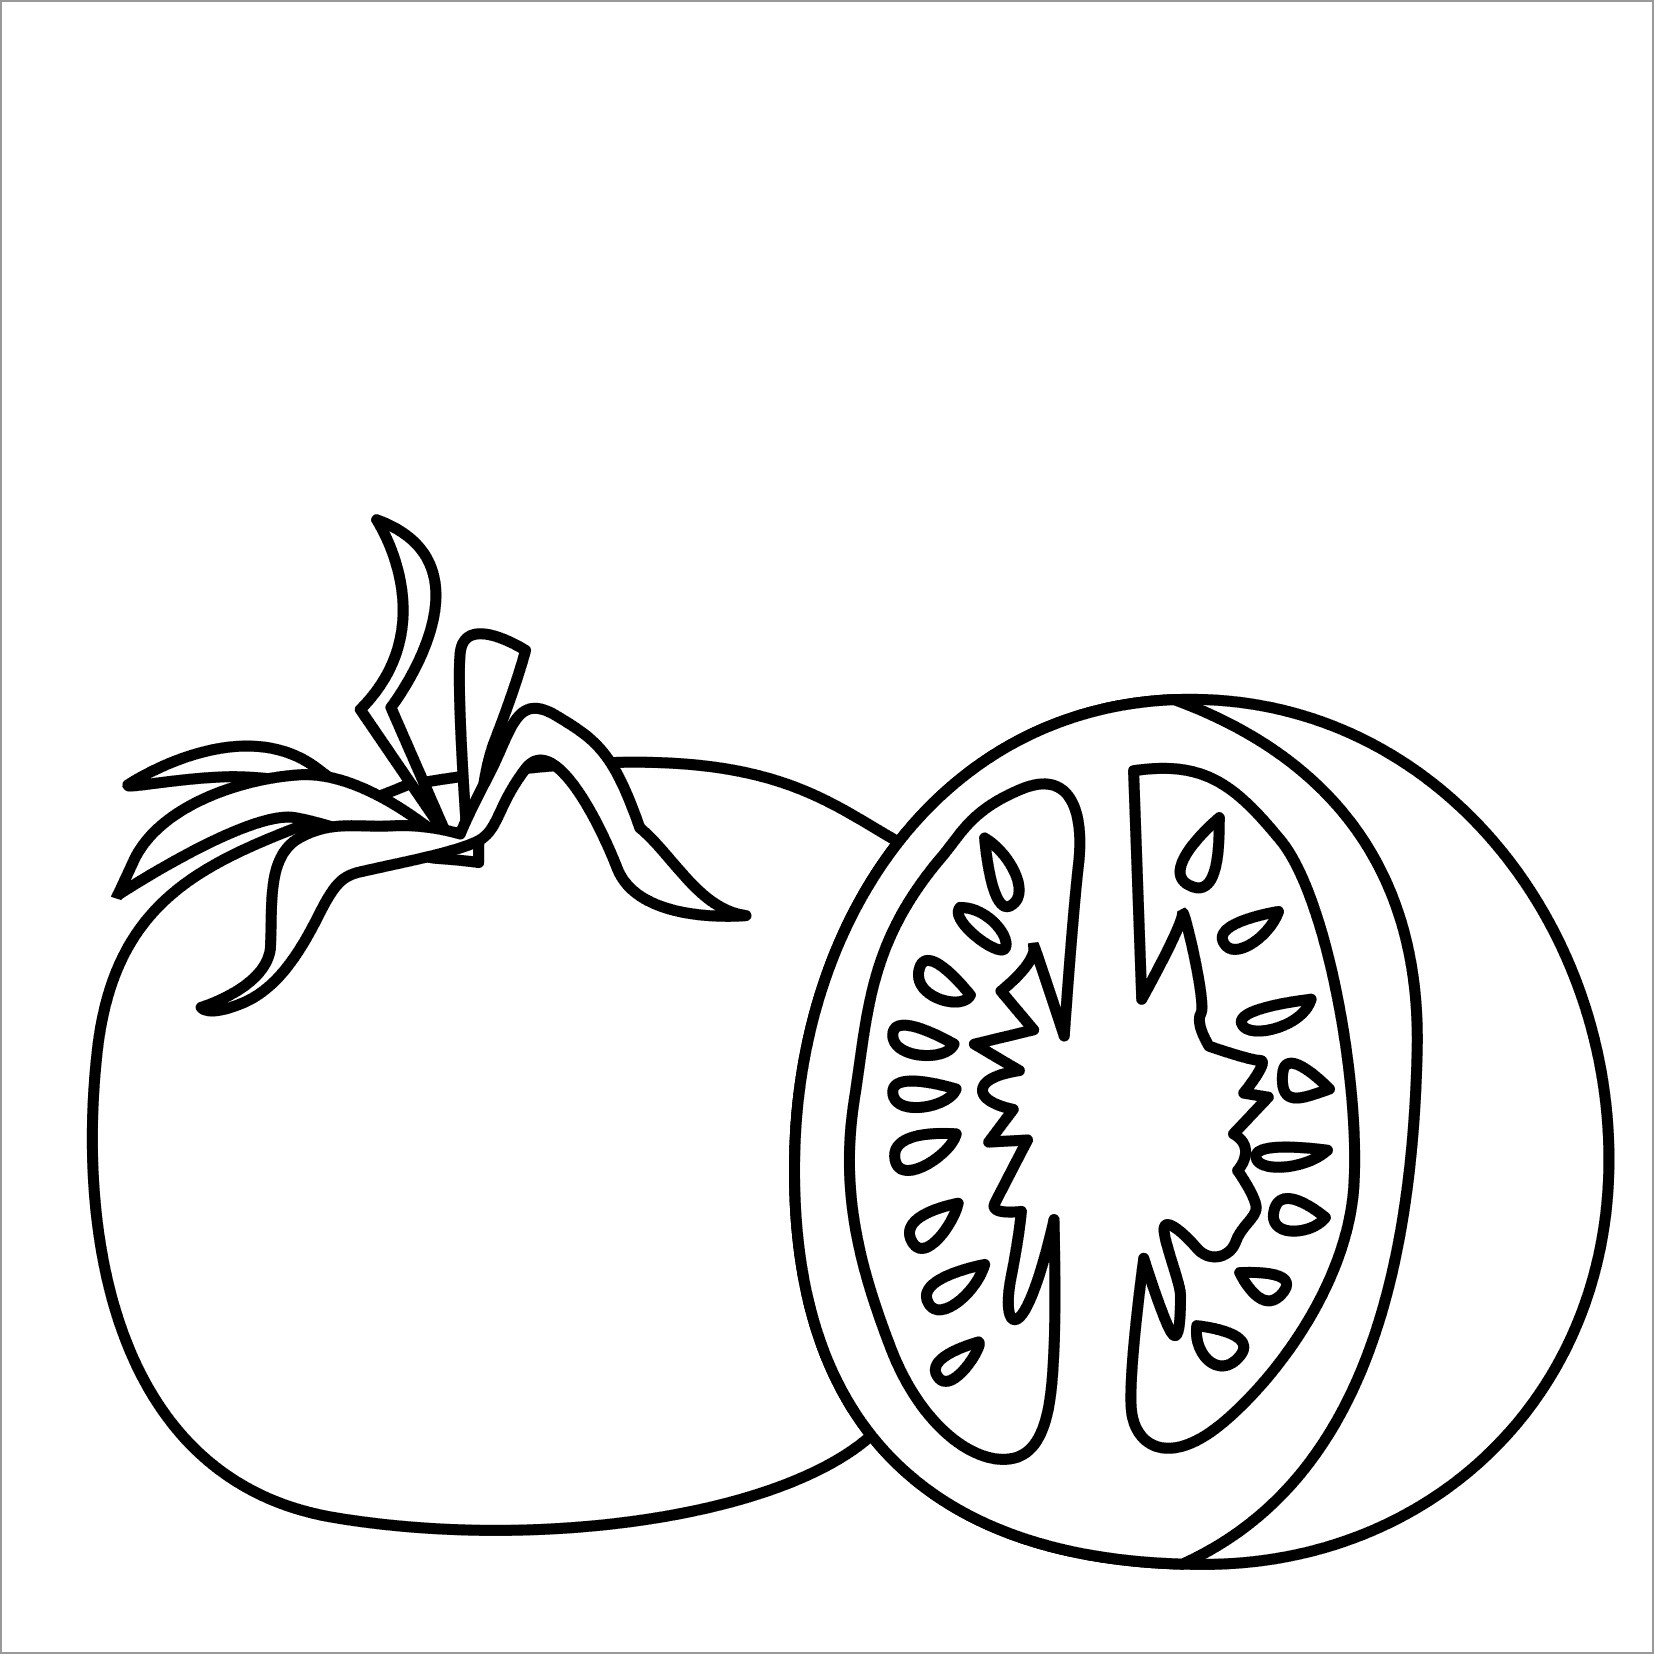 Sliced tomatoes Coloring Page